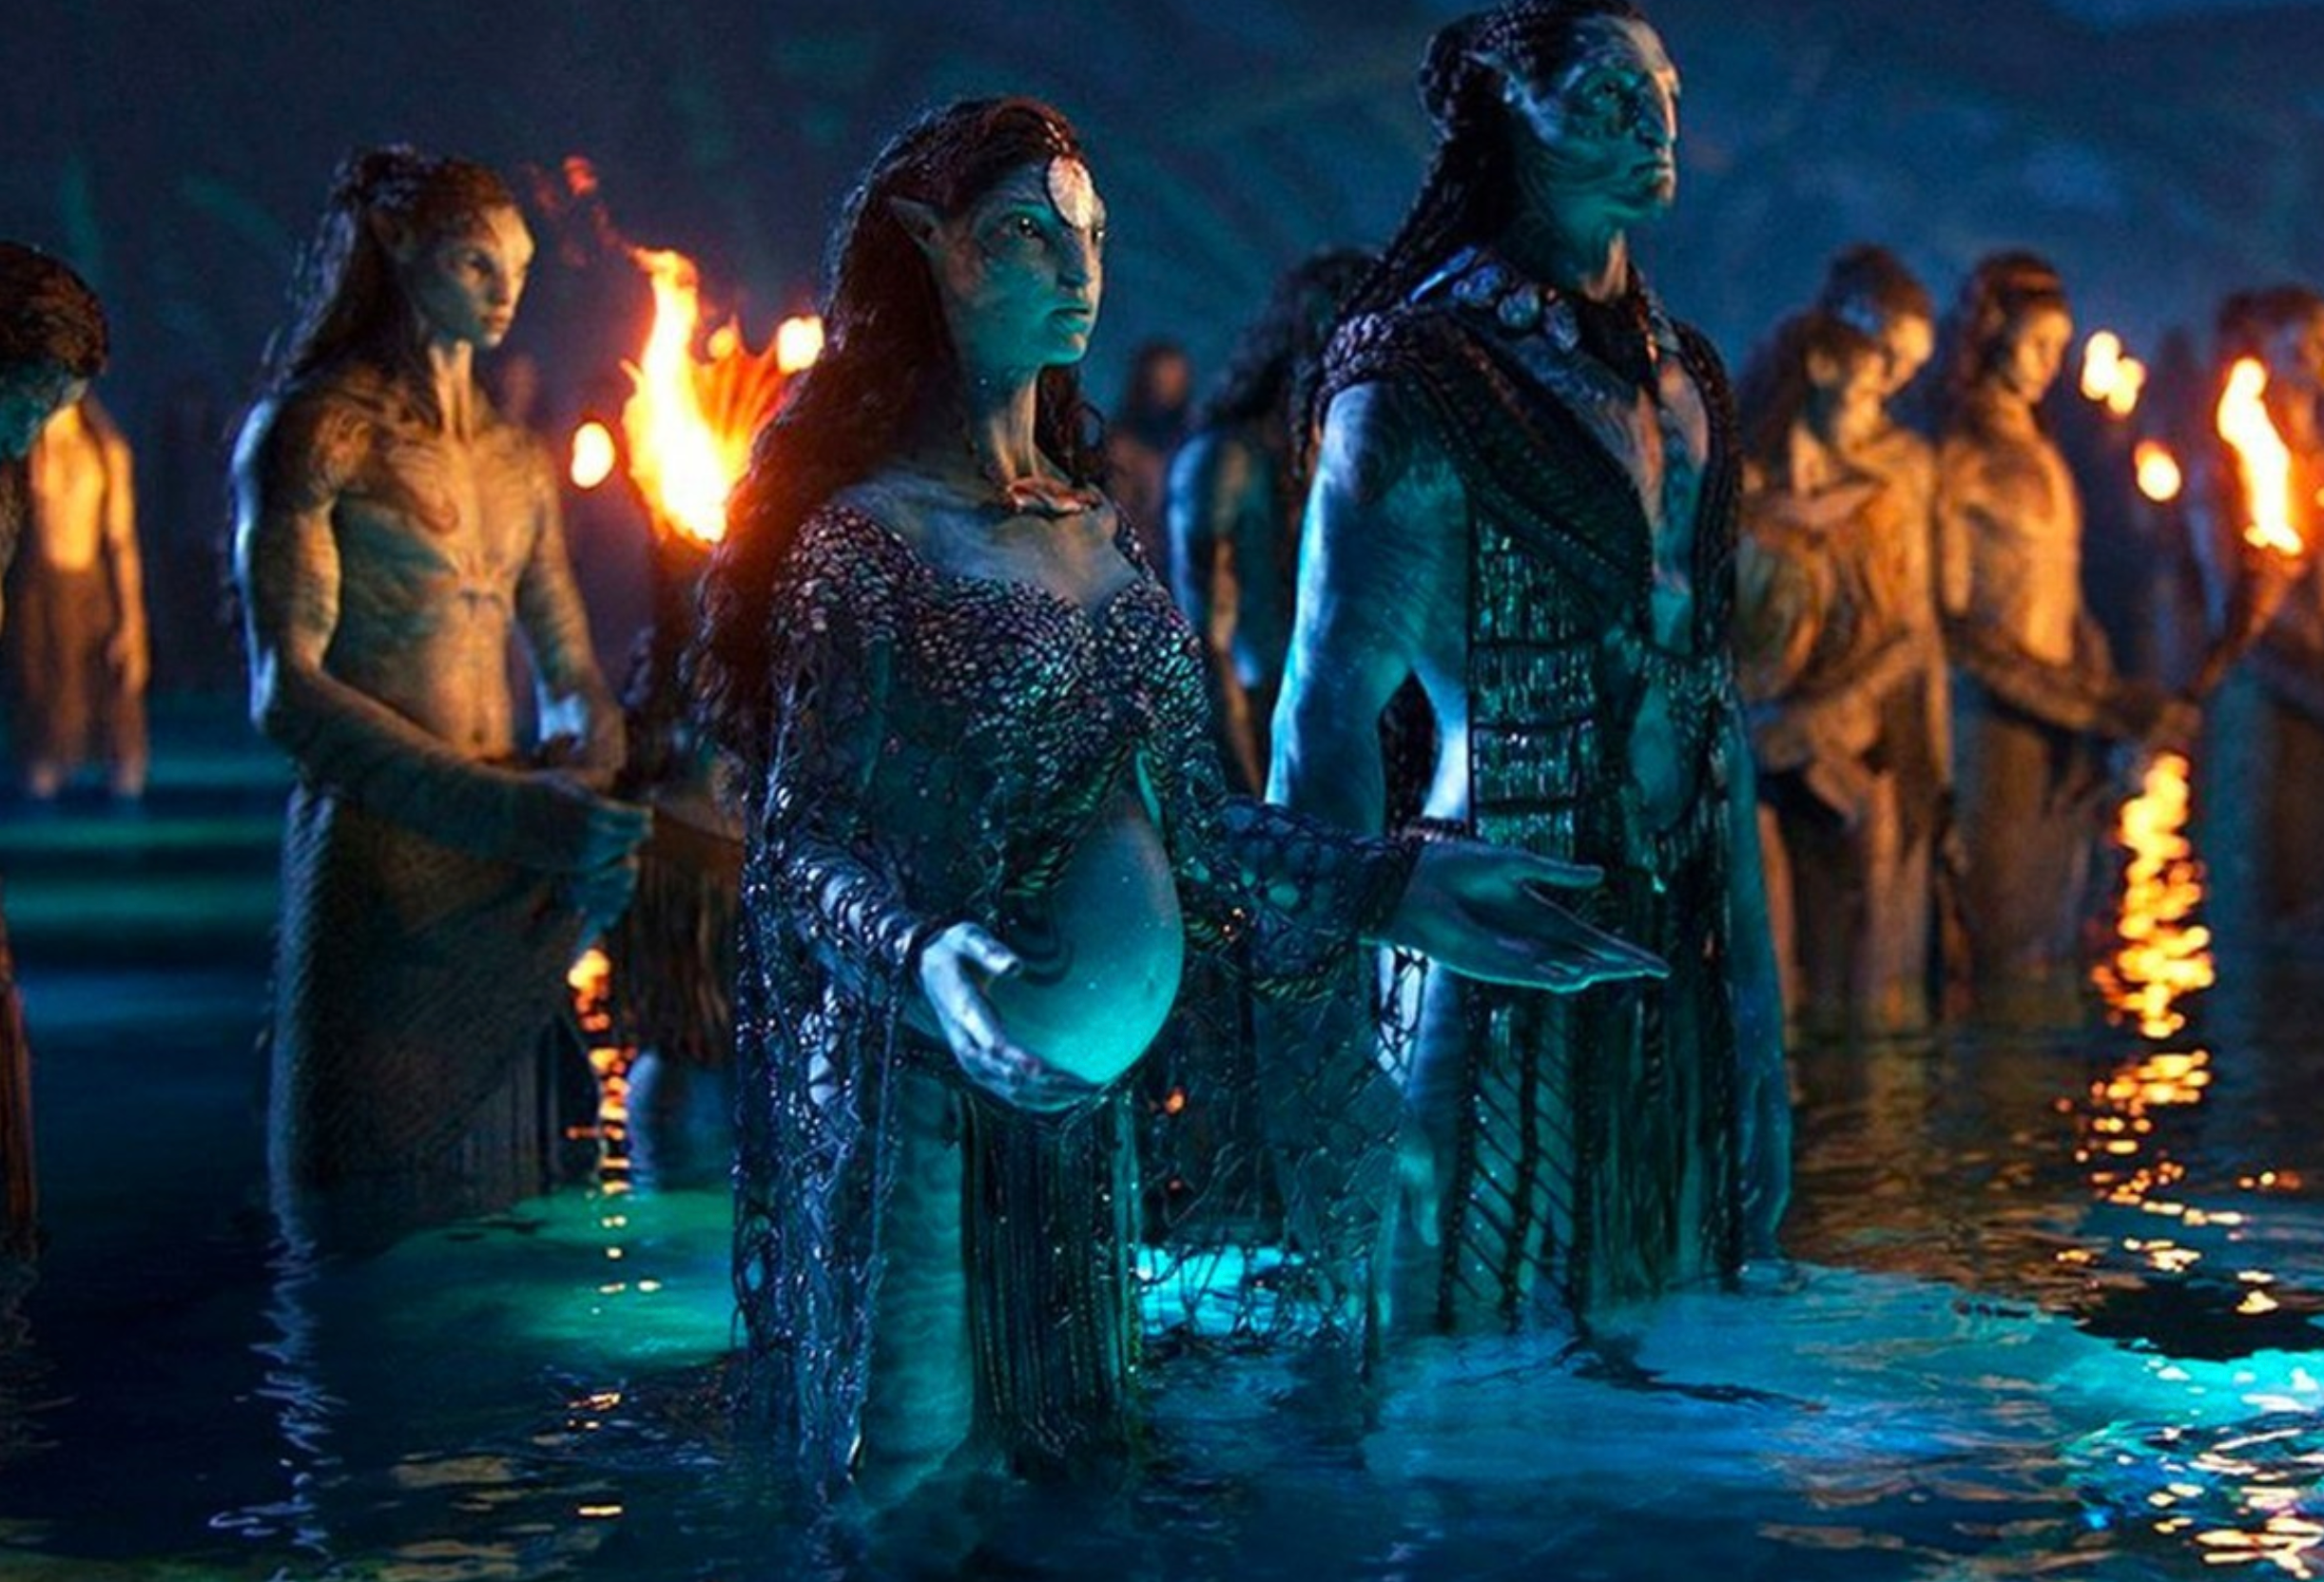 'Avatar: The Way of Water' Passes Top 15th Highest-Grossing Film Mark With $1.37 Billion USD at Global Box Office